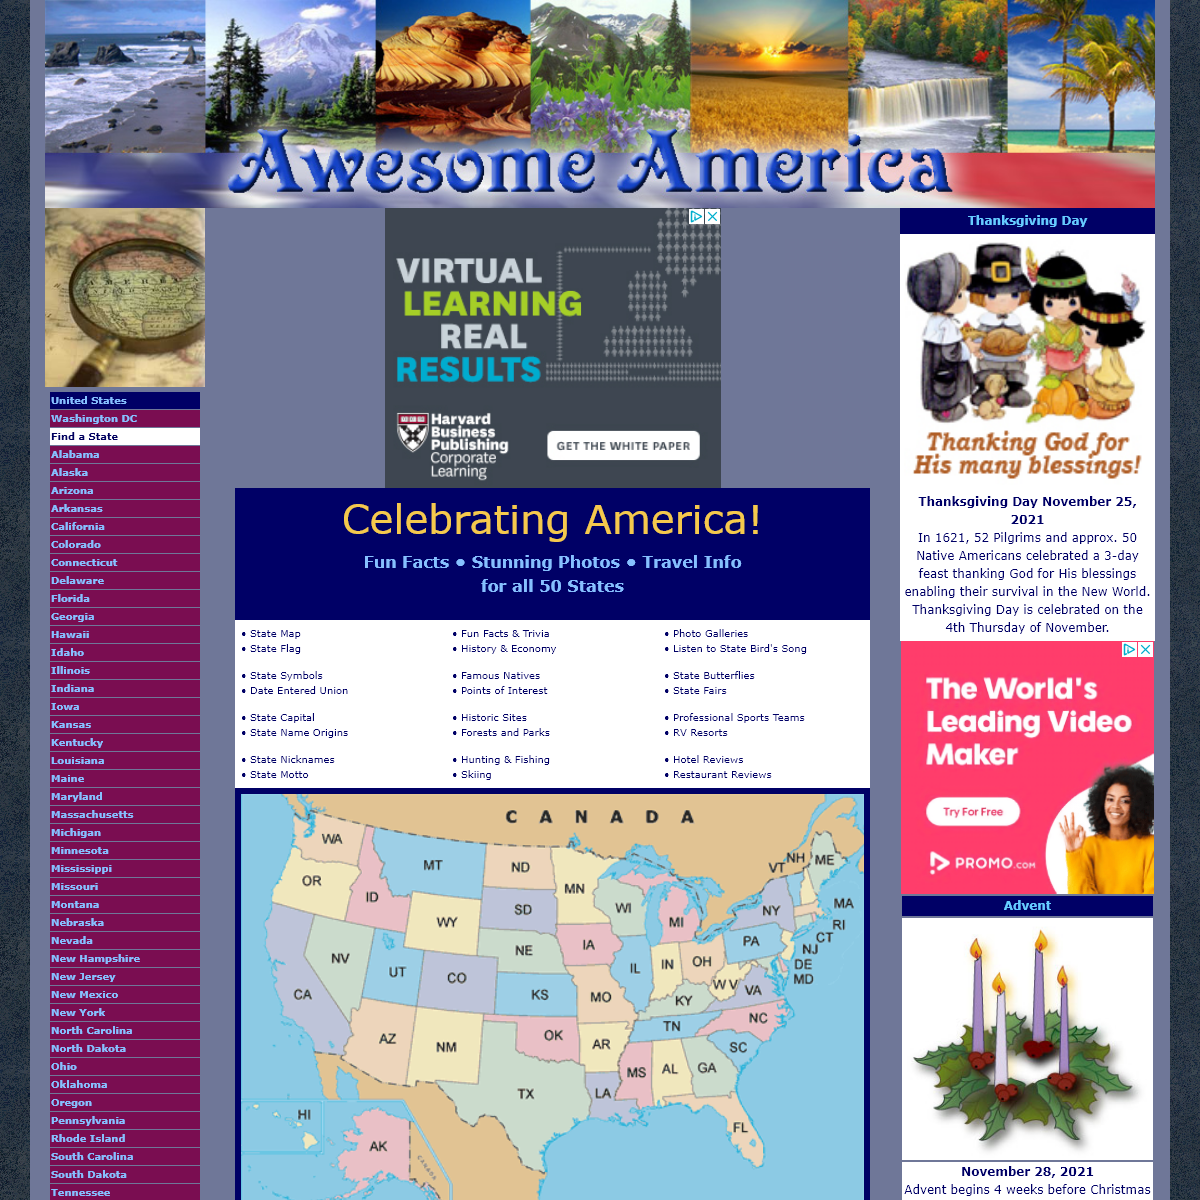 A complete backup of awesomeamerica.com